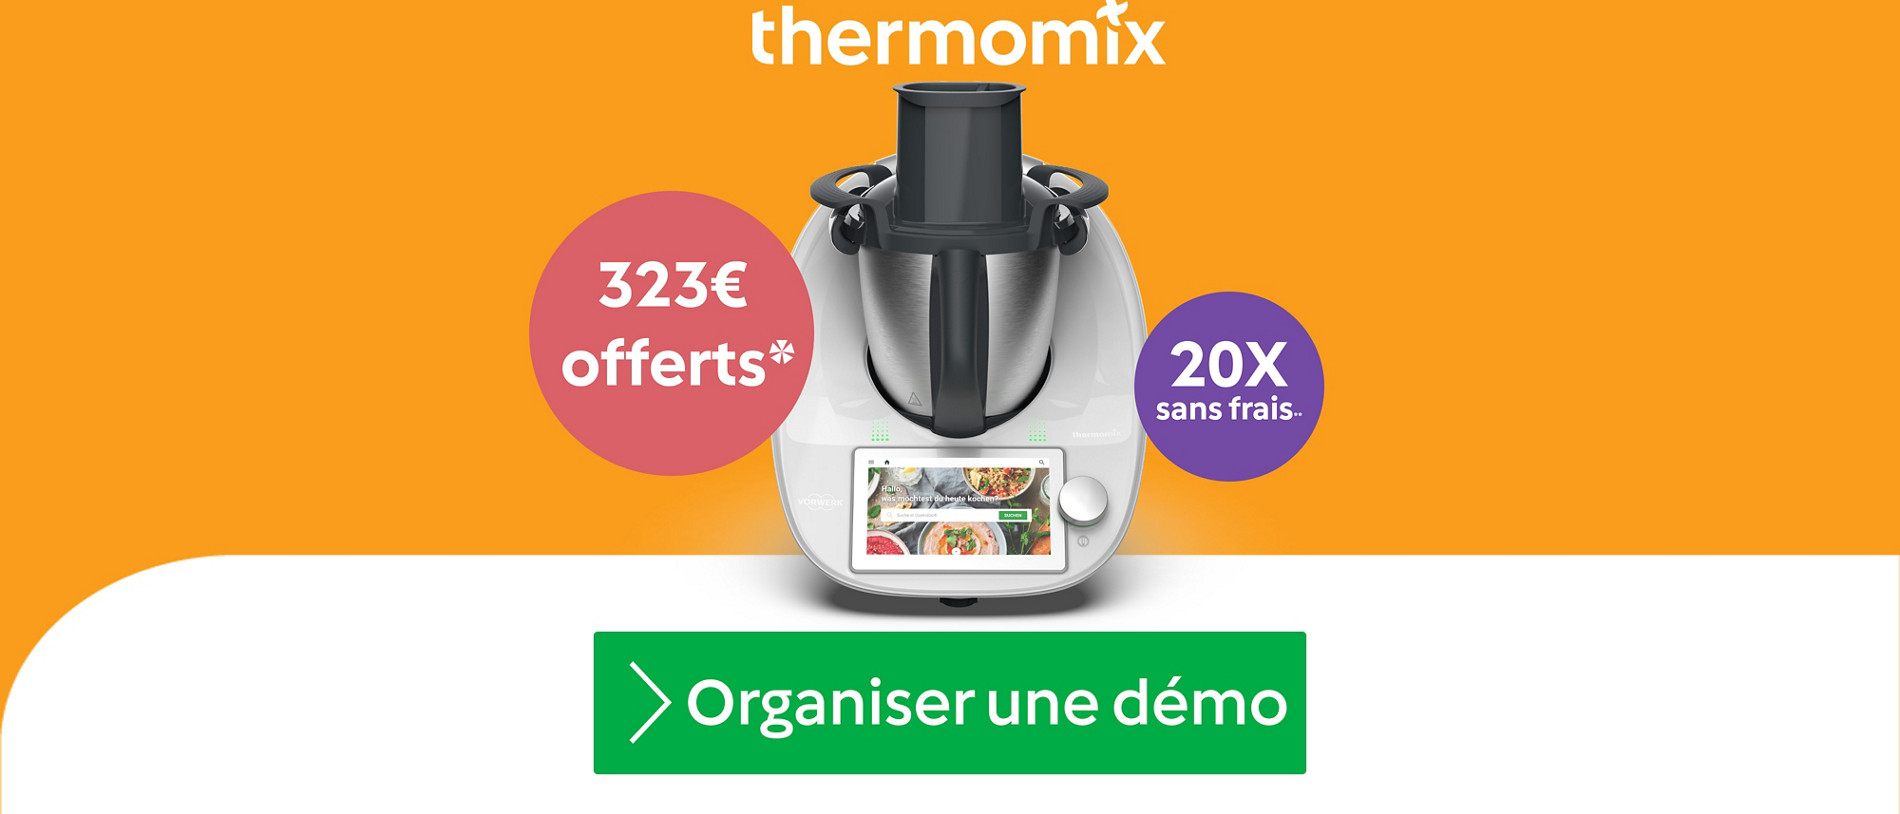 Offre thermomix client moment